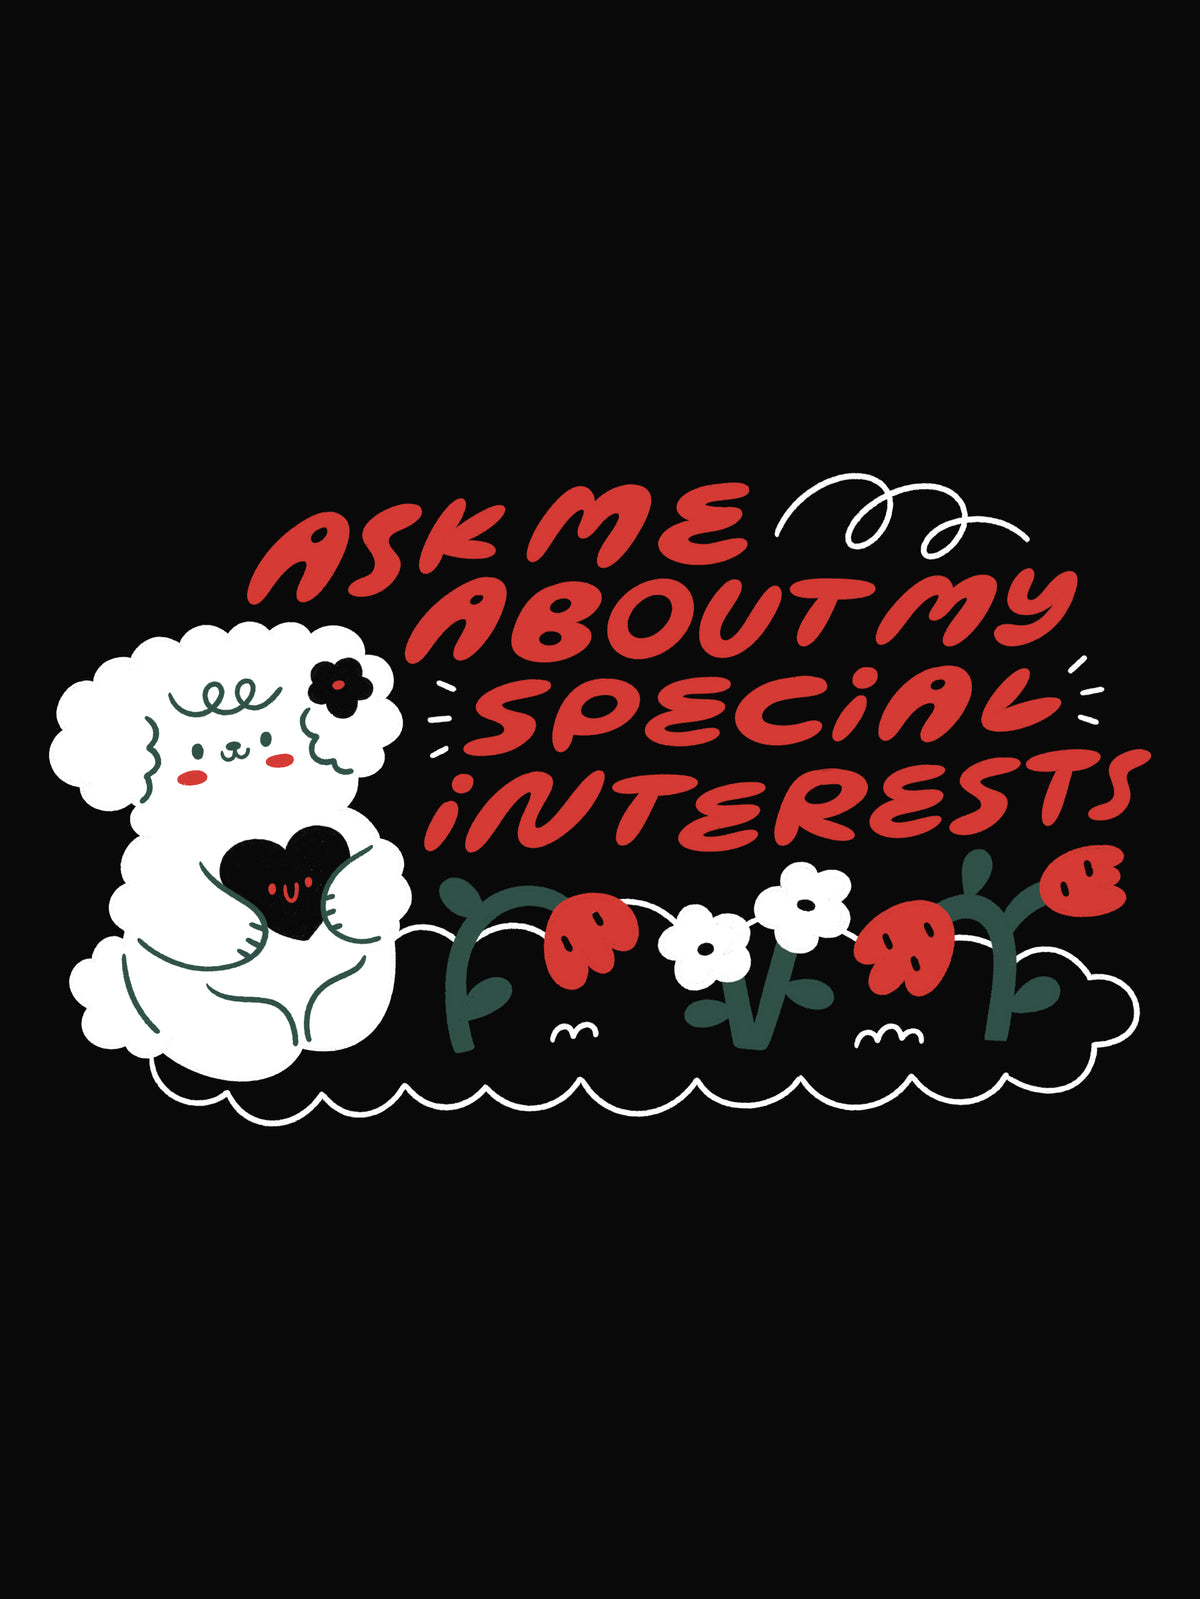 Ask Me About My Special Interests by candy.courn / courtneyahndesign